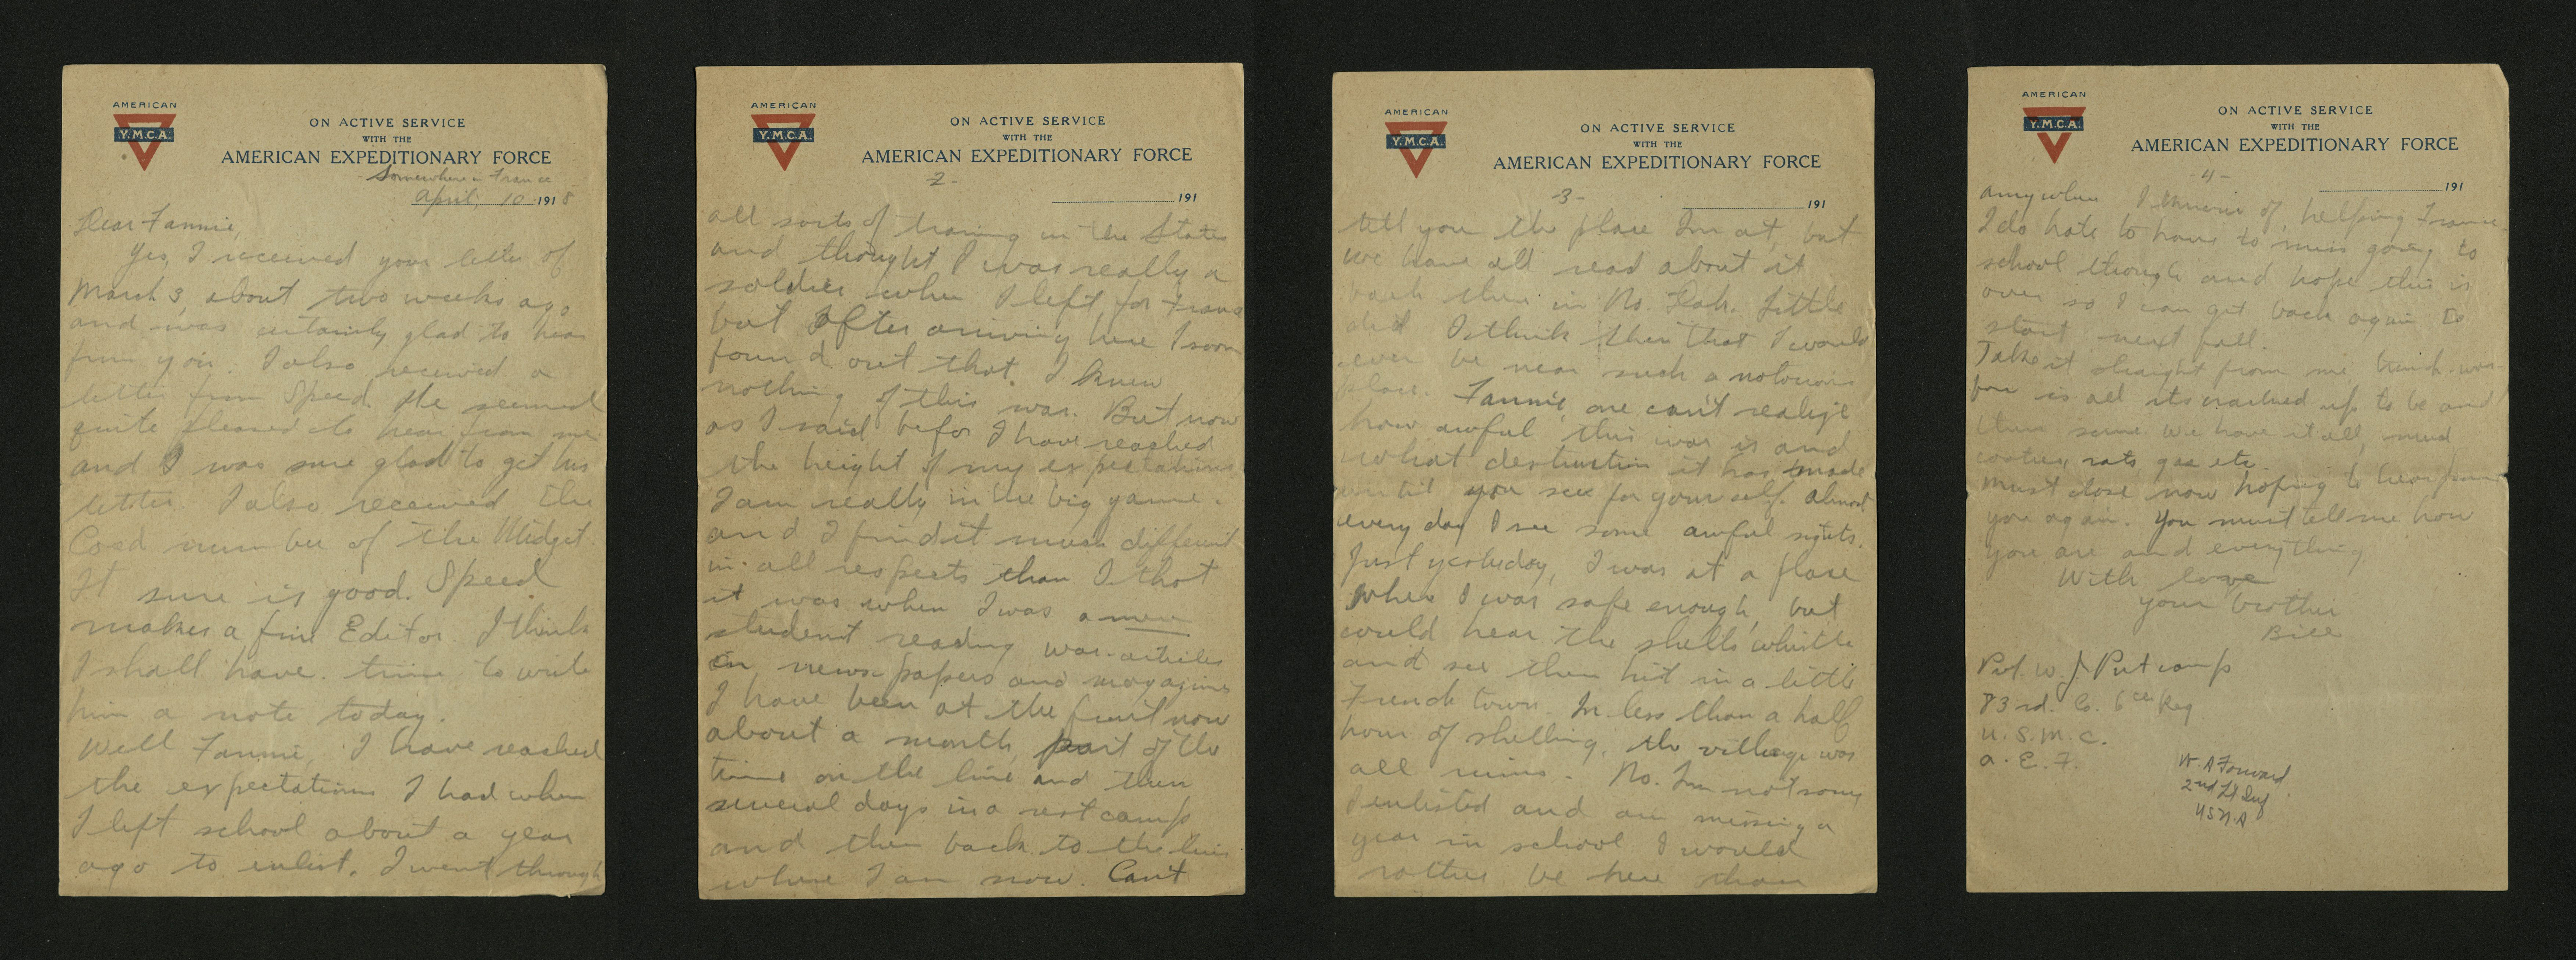 Letter from William J. Putcamp to Fannie, dated 10 April 1918